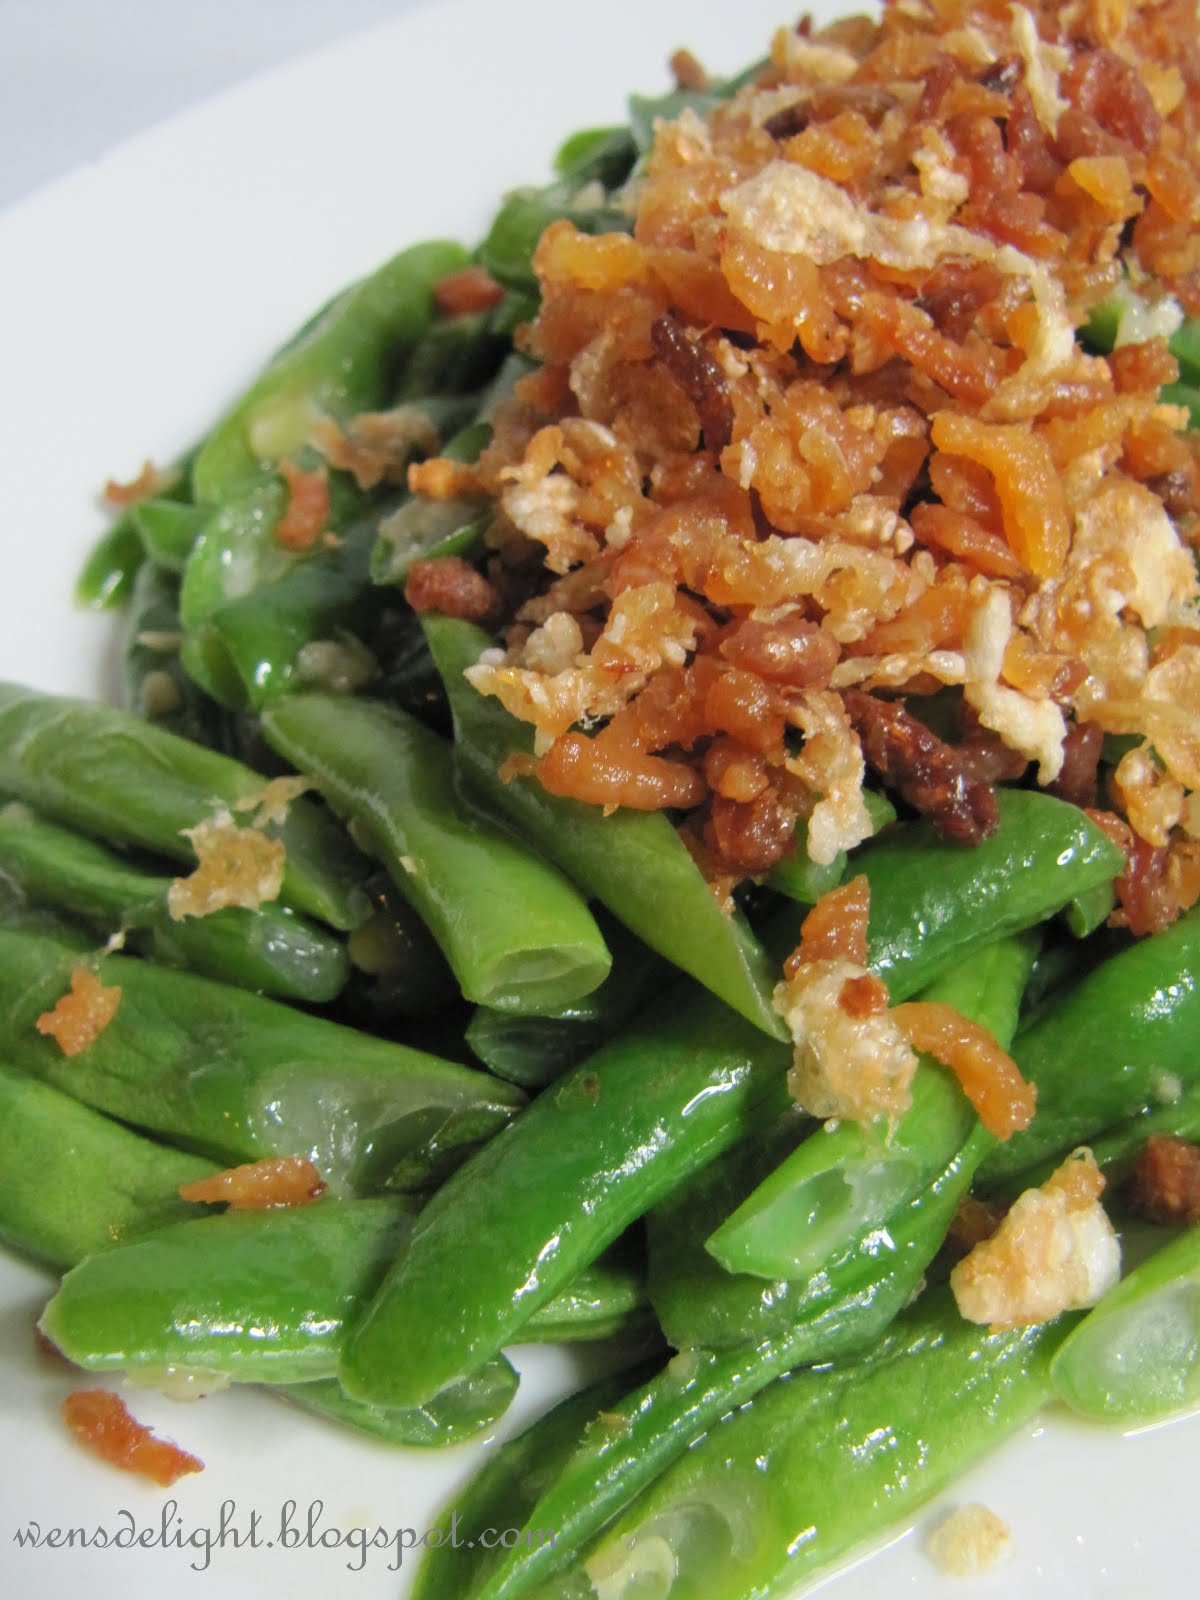 Wen's Delight: Stir Fry French Bean with Preserved Radish & Dried Shrimp